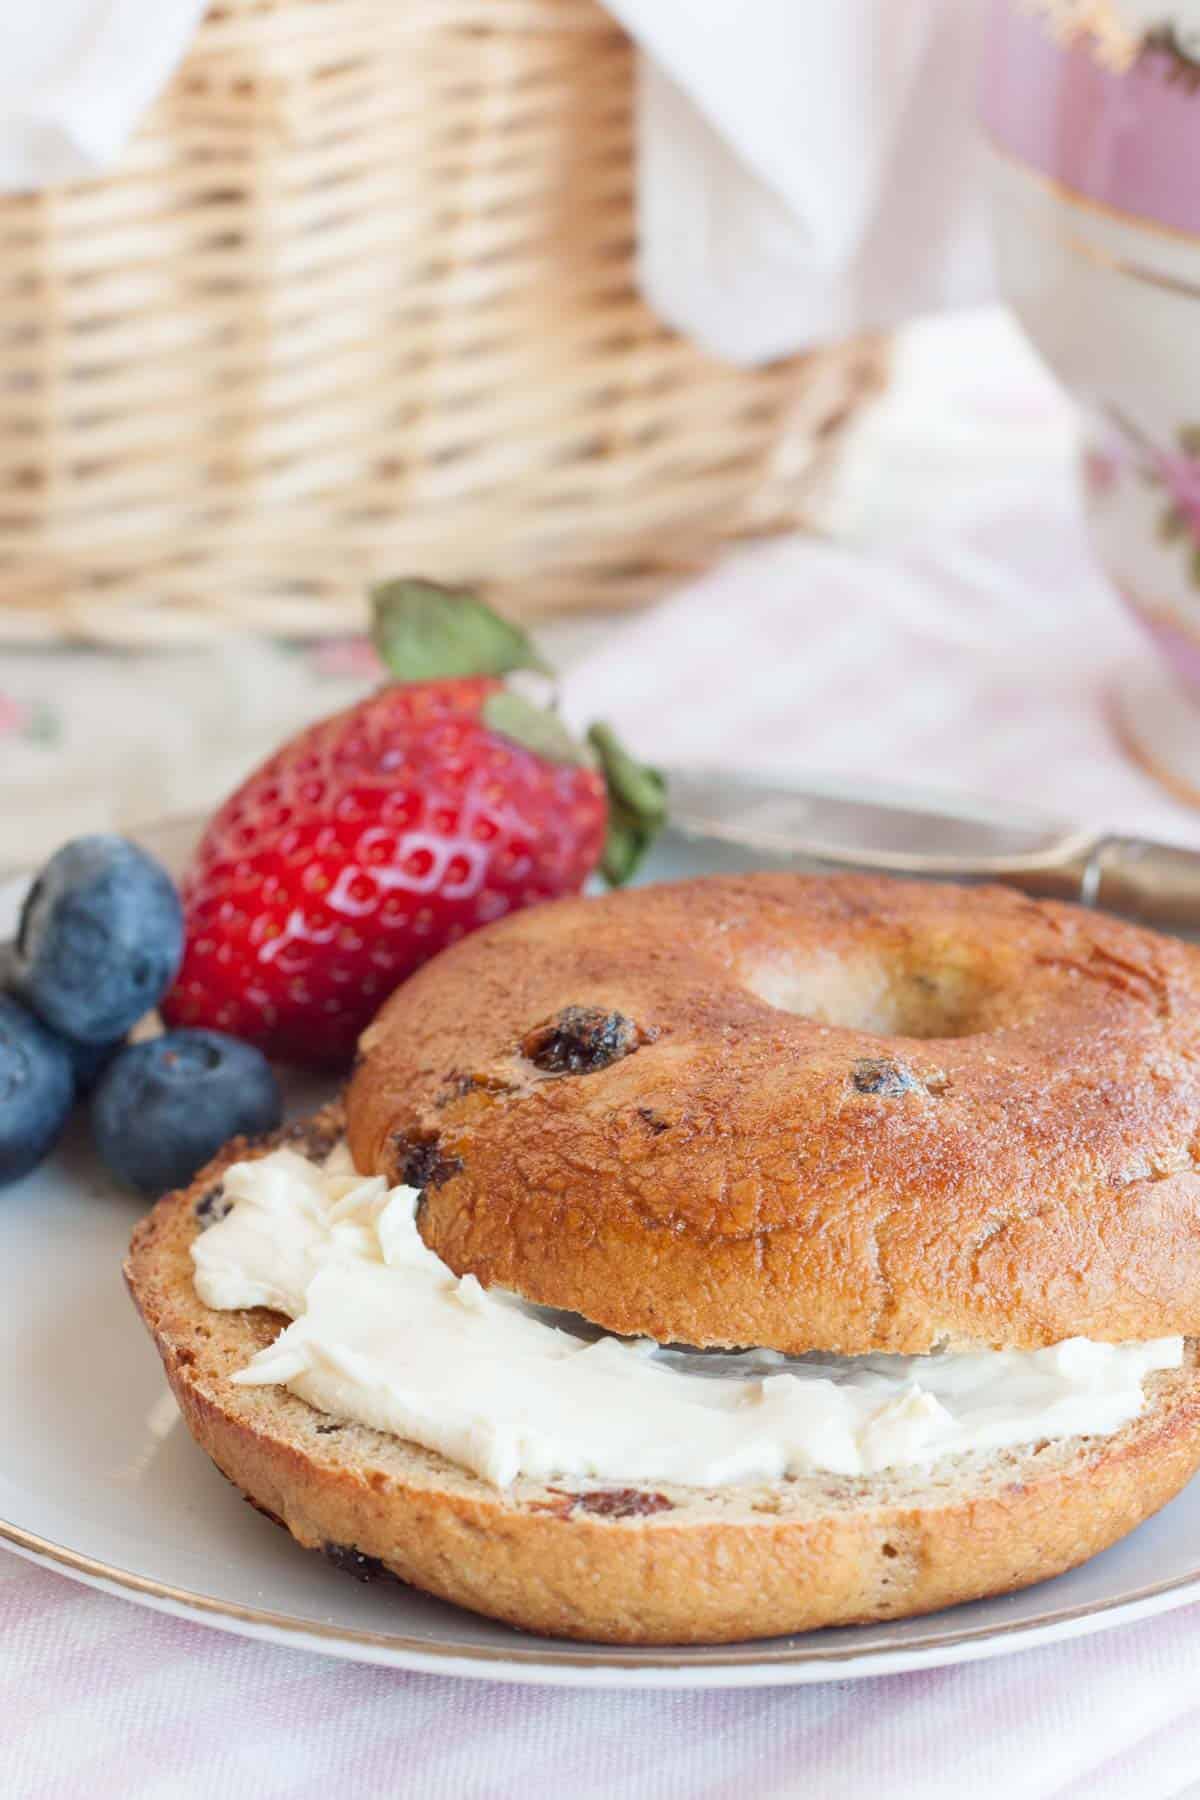 A cinnamon raisin bagel with cream cheese on a plate beside some fresh berries